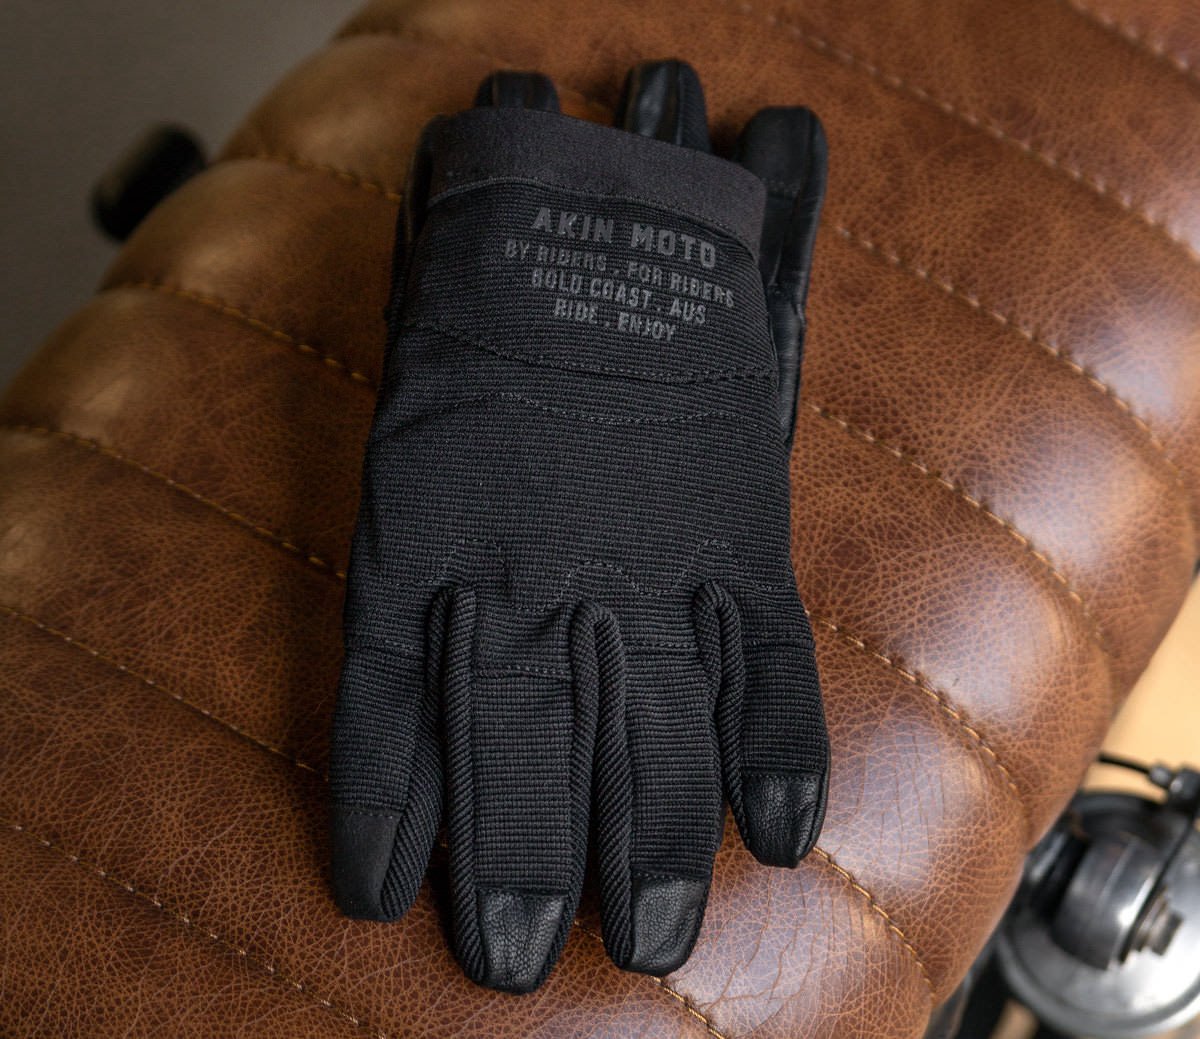 The New Grenade Motorcycle Gloves from Akin Moto